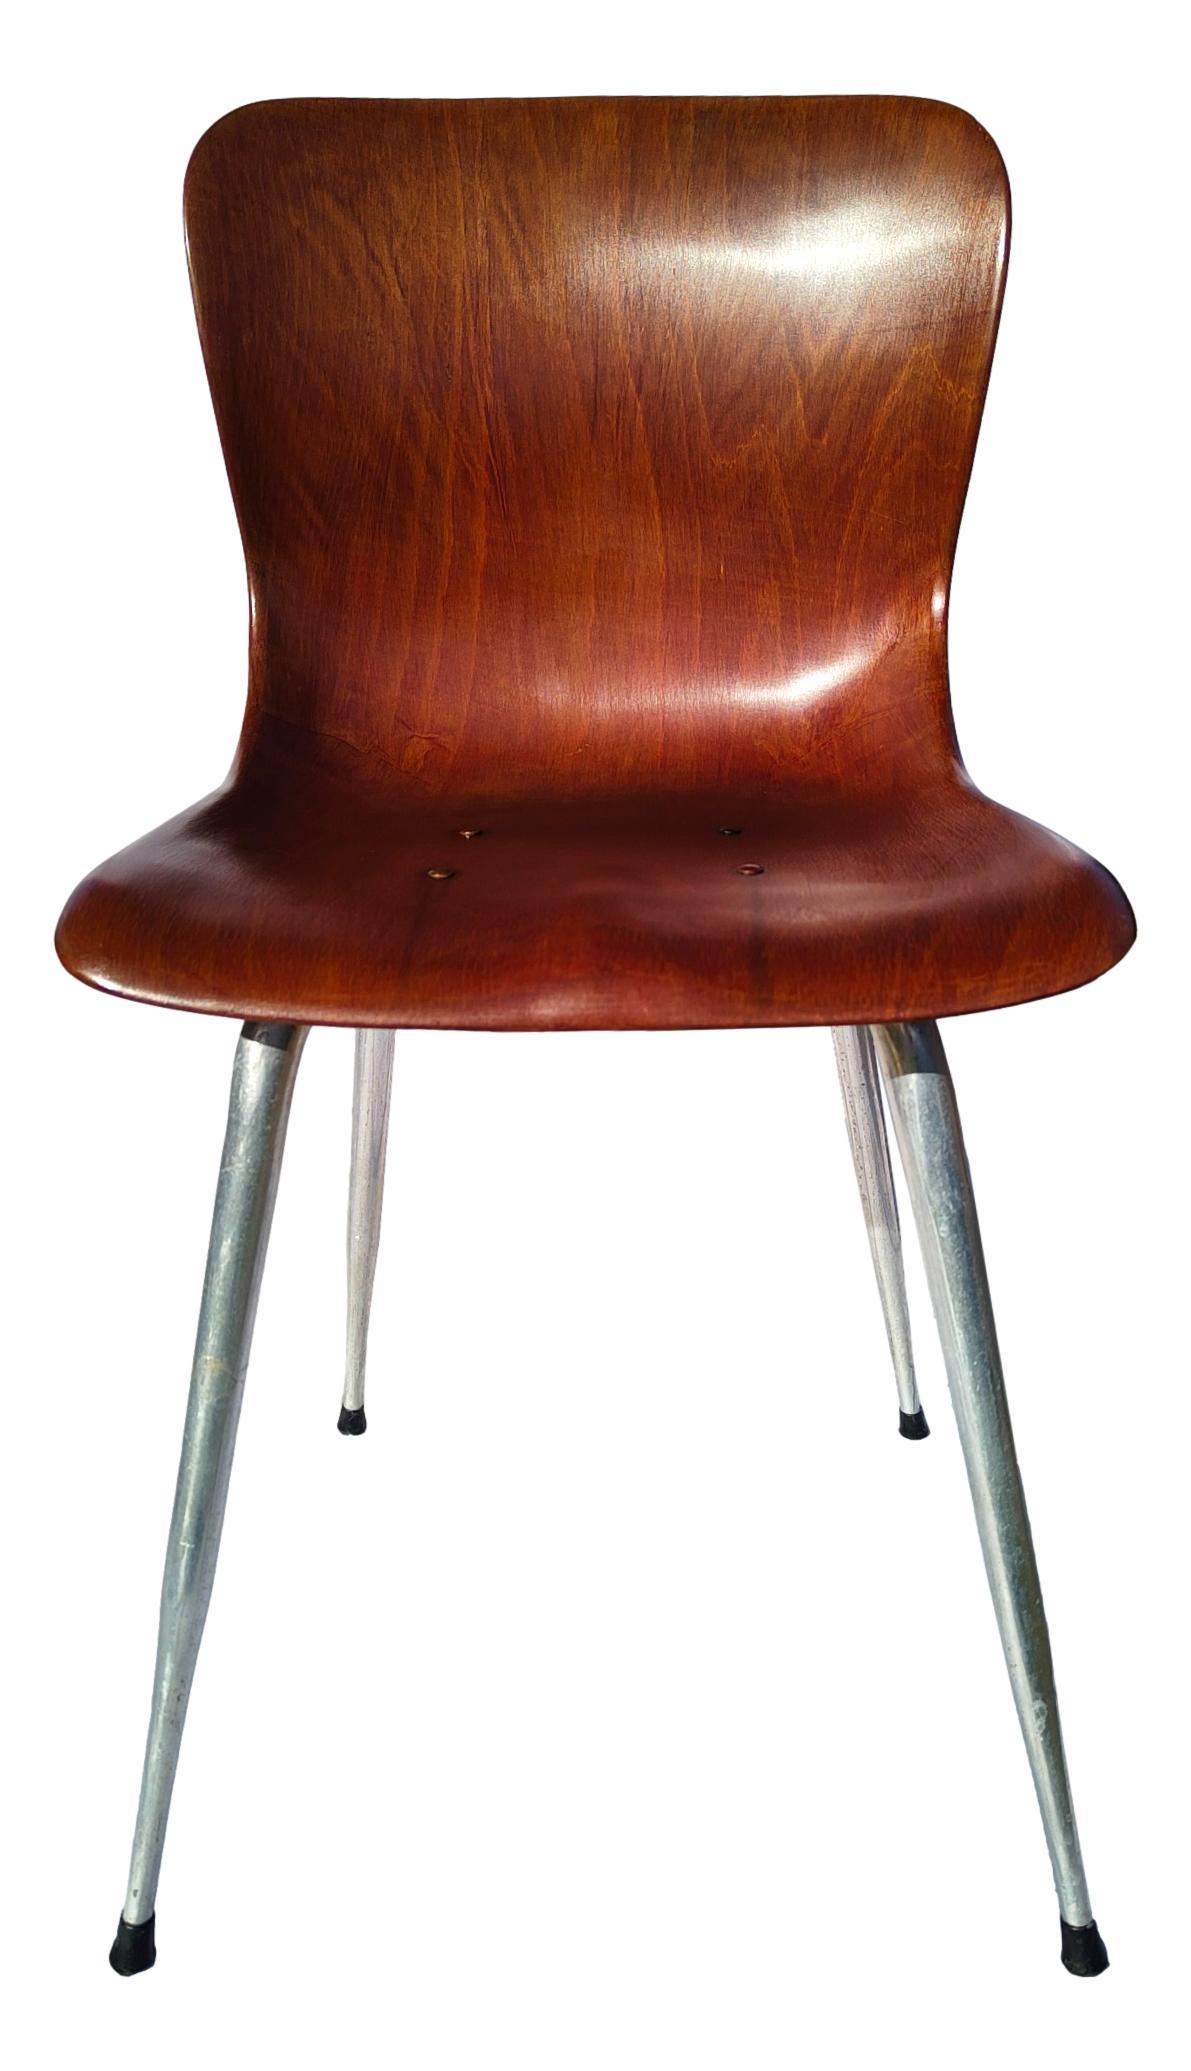 Wonderful 15074/II chair by elmar flototto for pagholz, late 1960, made in curved wood wit aluminum base, in very good vintage conditions.